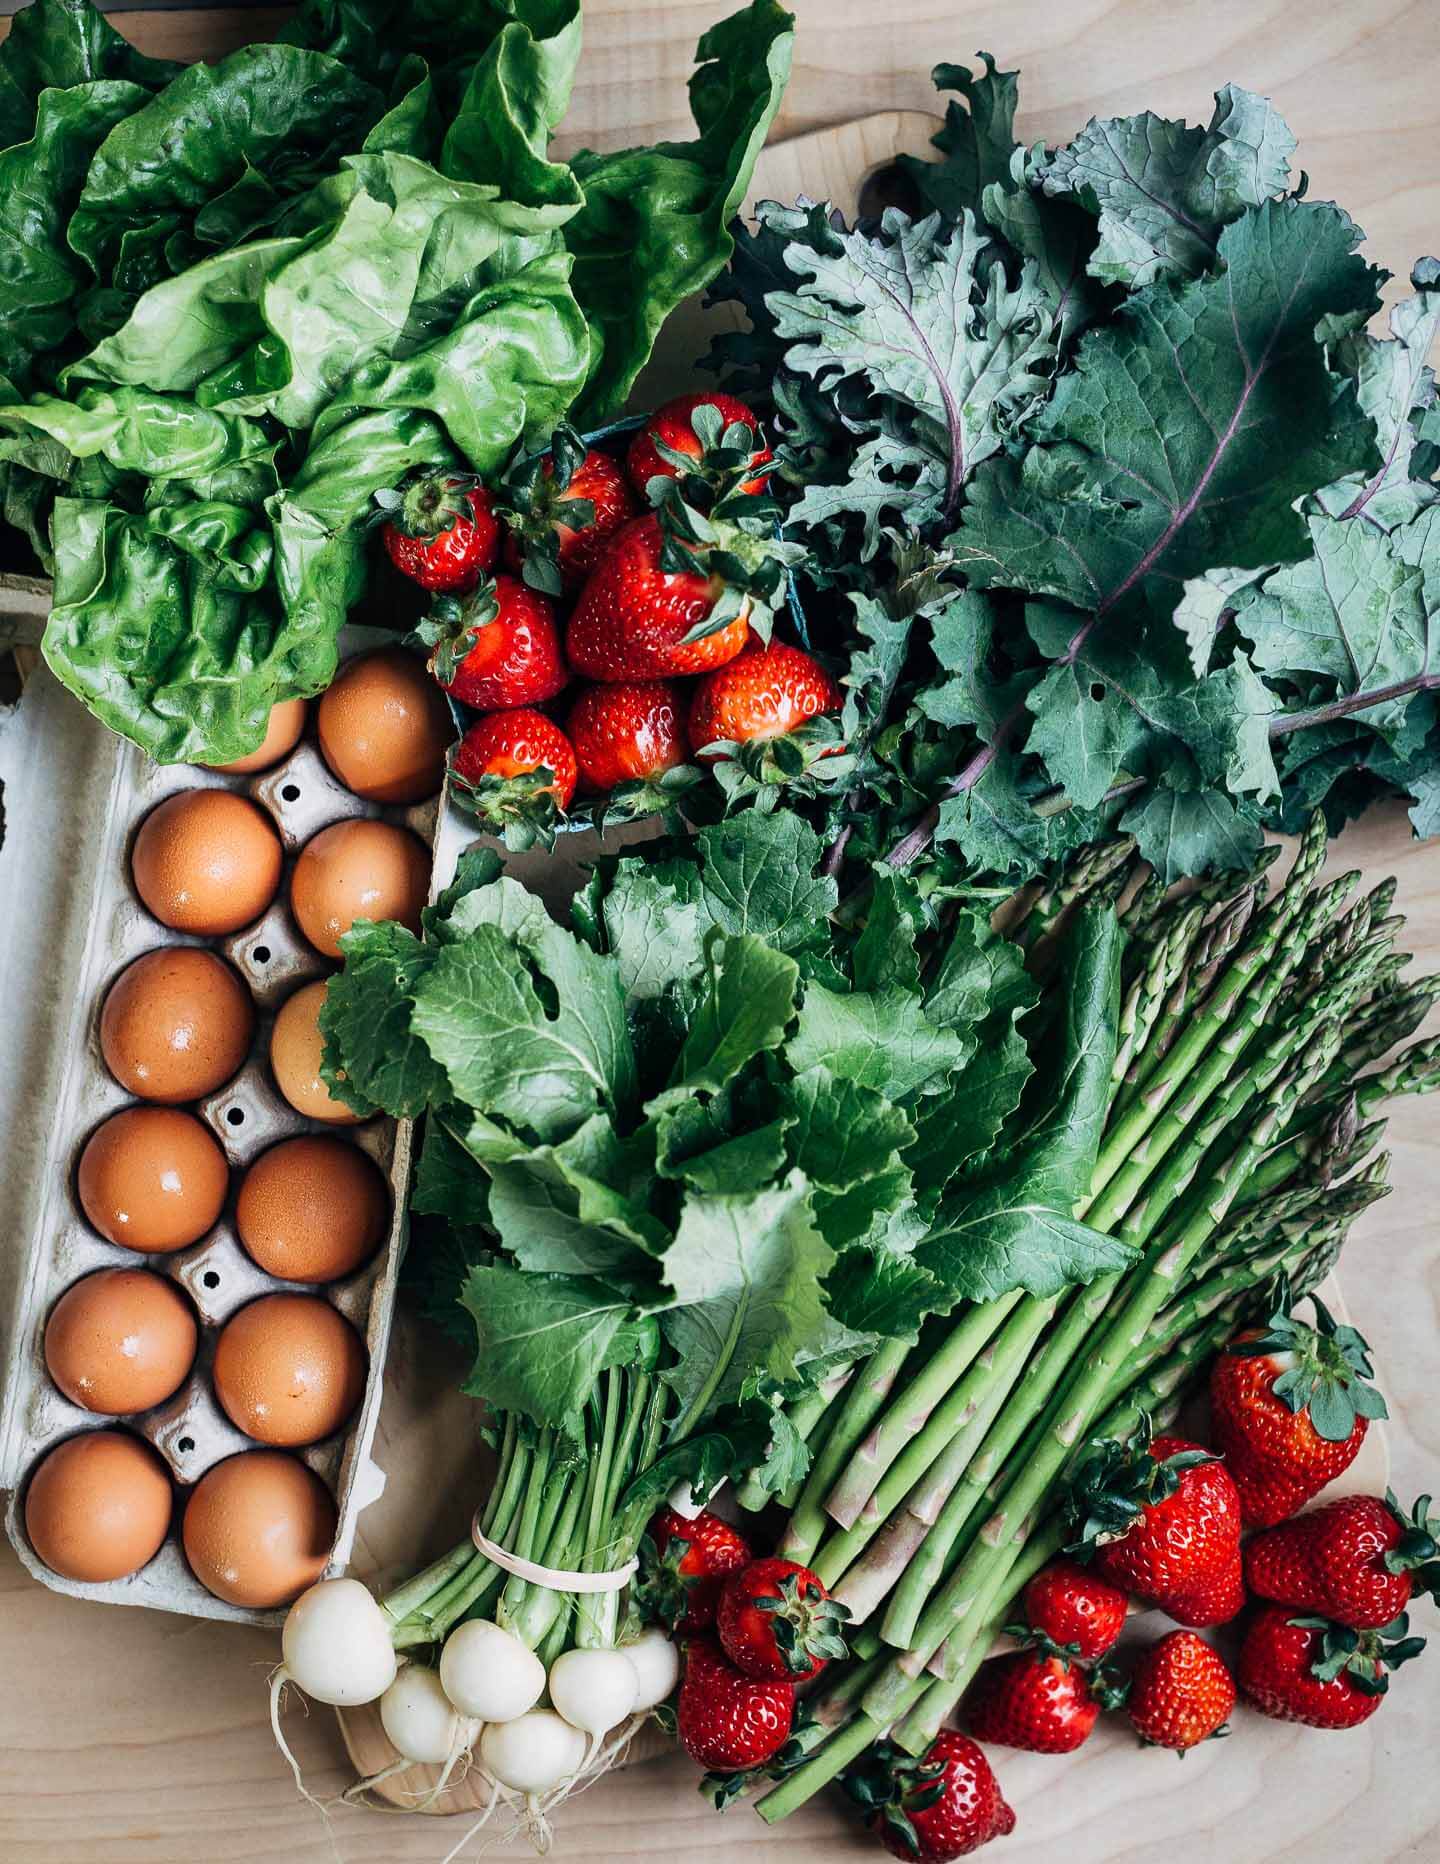 A tabletop with piles of lettuce, kale, asparagus, strawberries, and brown eggs. 